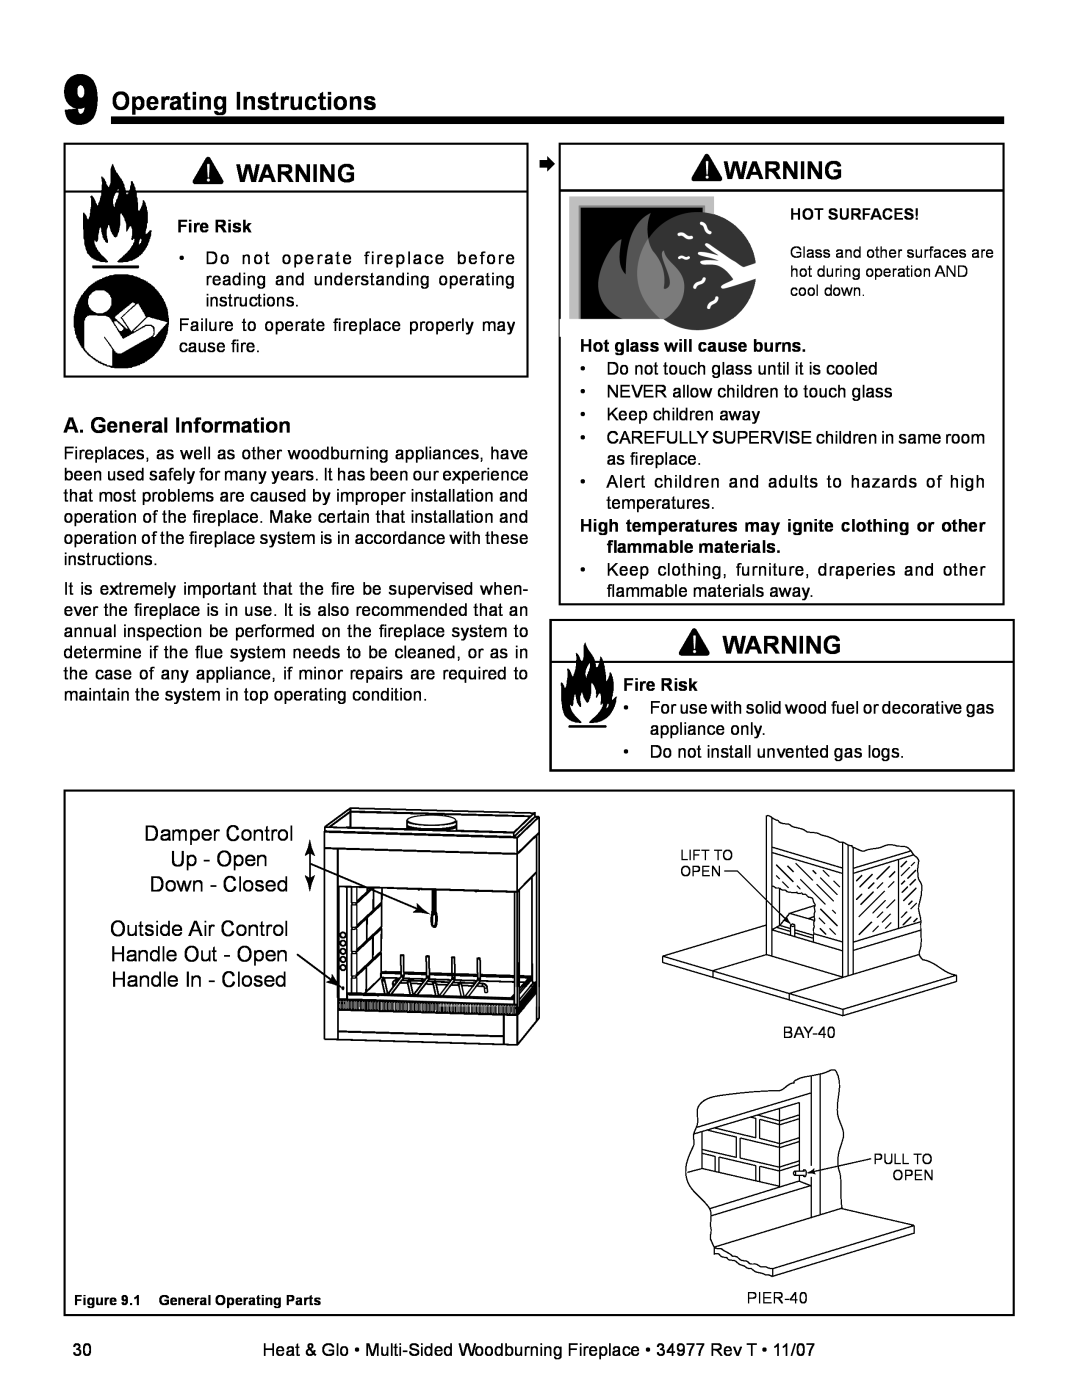 Heat & Glo LifeStyle BAY-40 Operating Instructions, A. General Information, Fire Risk, Hot glass will cause burns 